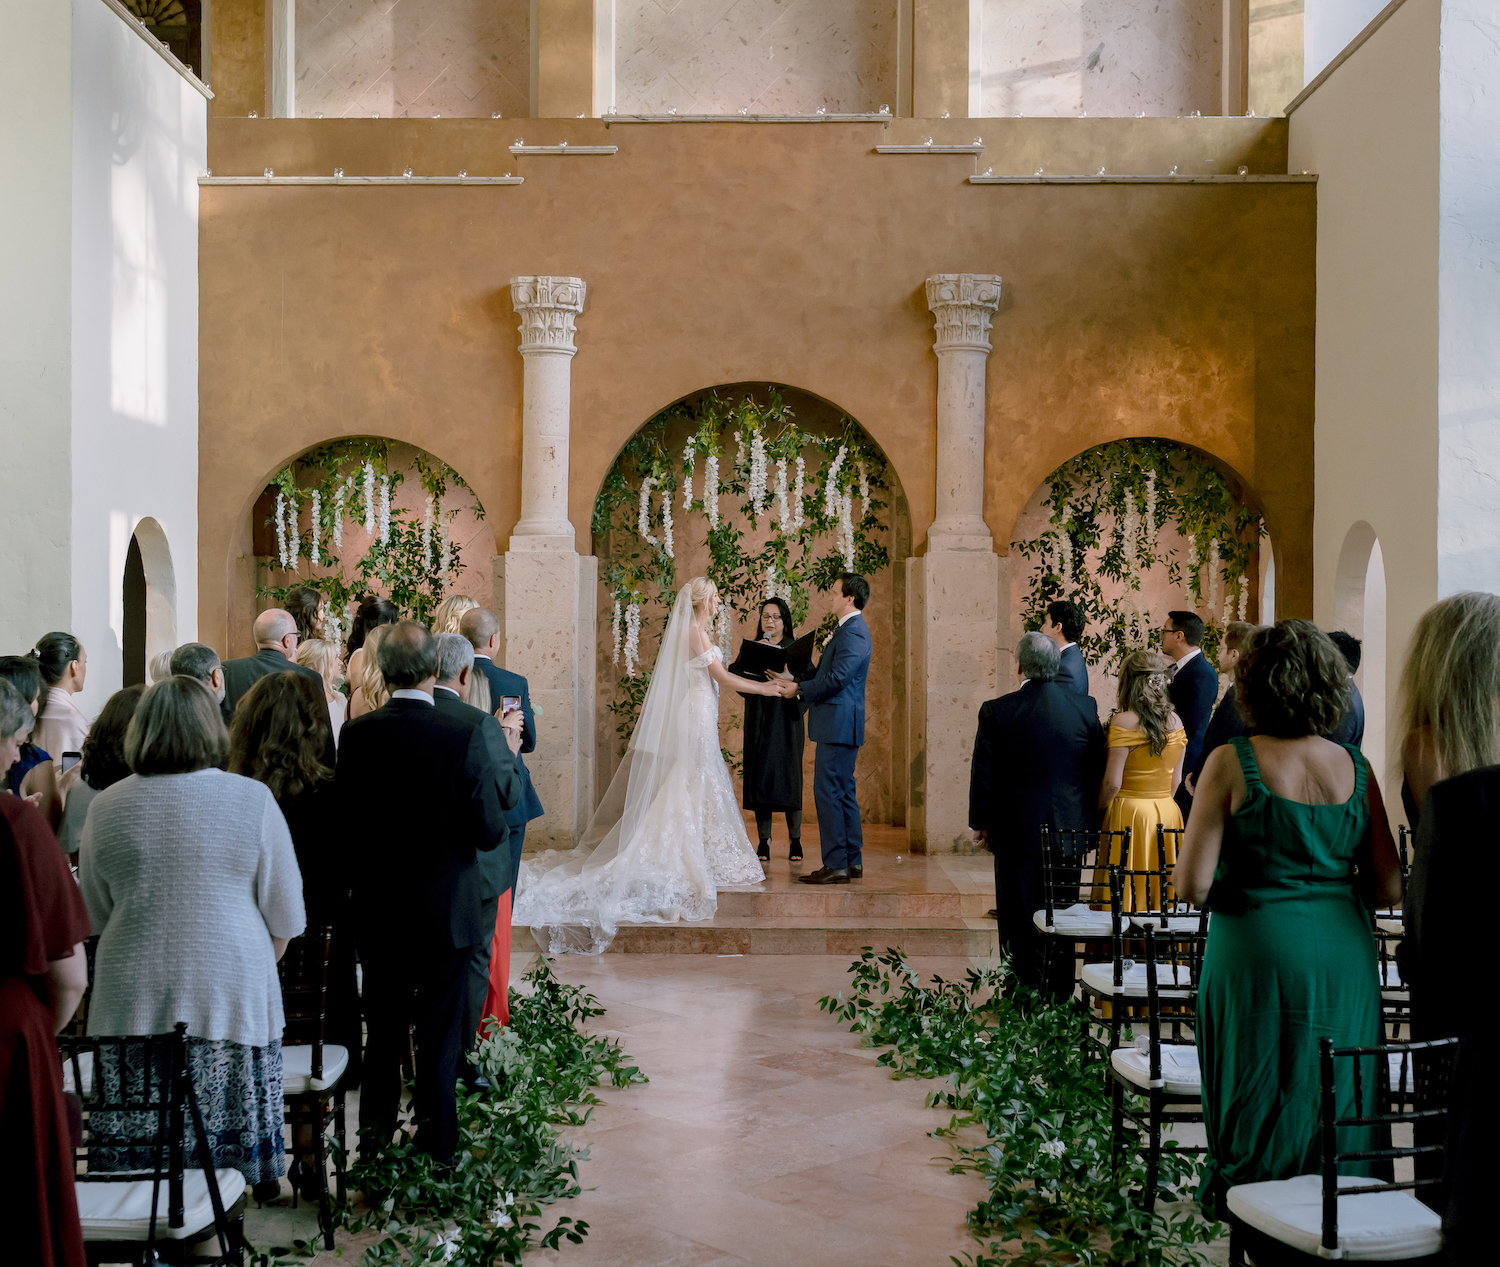 The Bell Tower on 34th, a wedding venue in Houston, TX has an onsite chapel. A bride and groom stand at the altar while the guests stand.